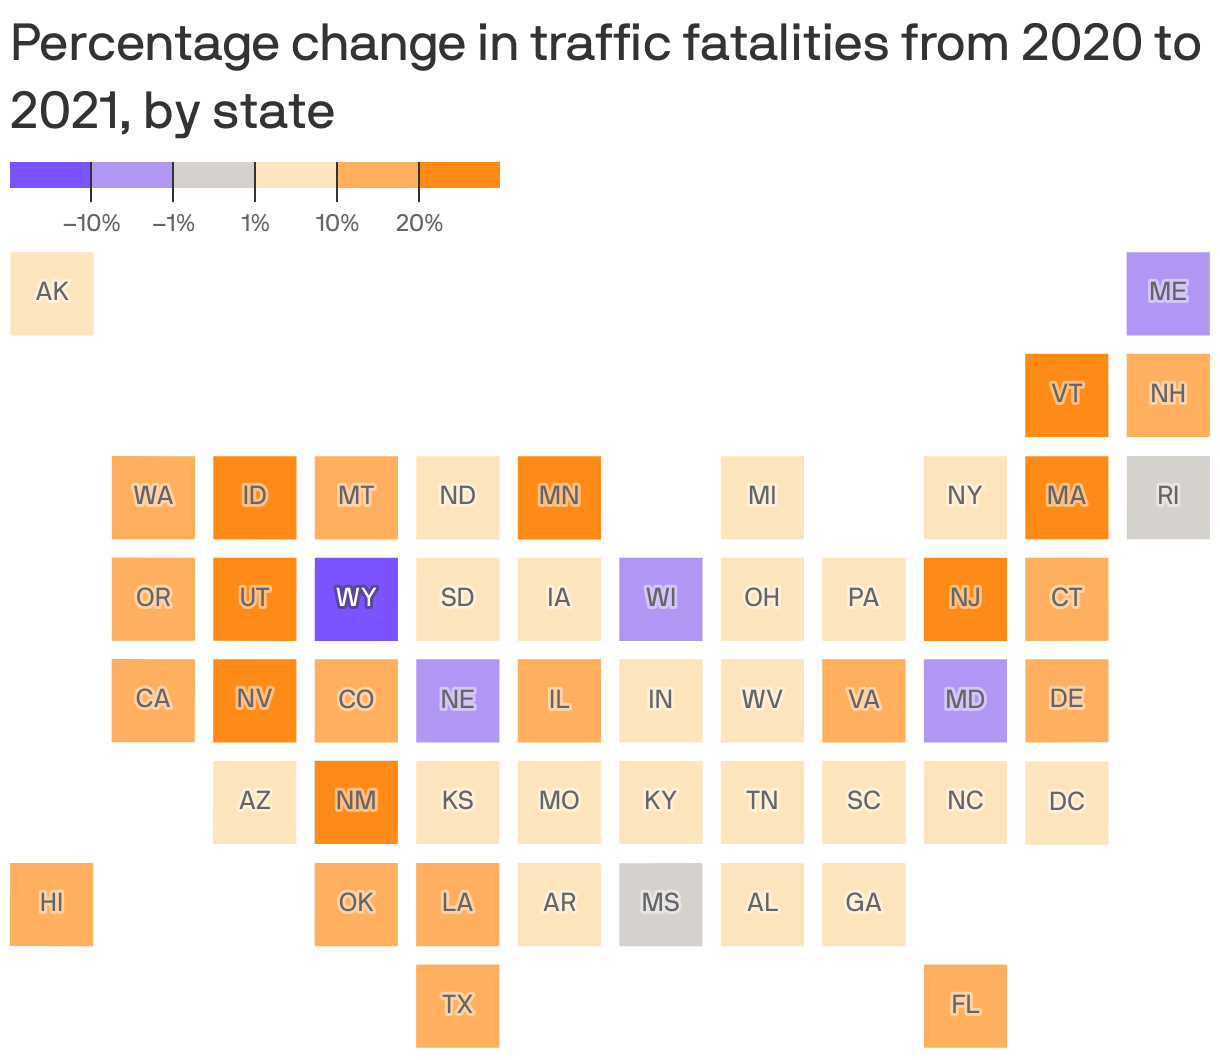 Percentage change in traffic fatalities from 2020 to 2021, by state